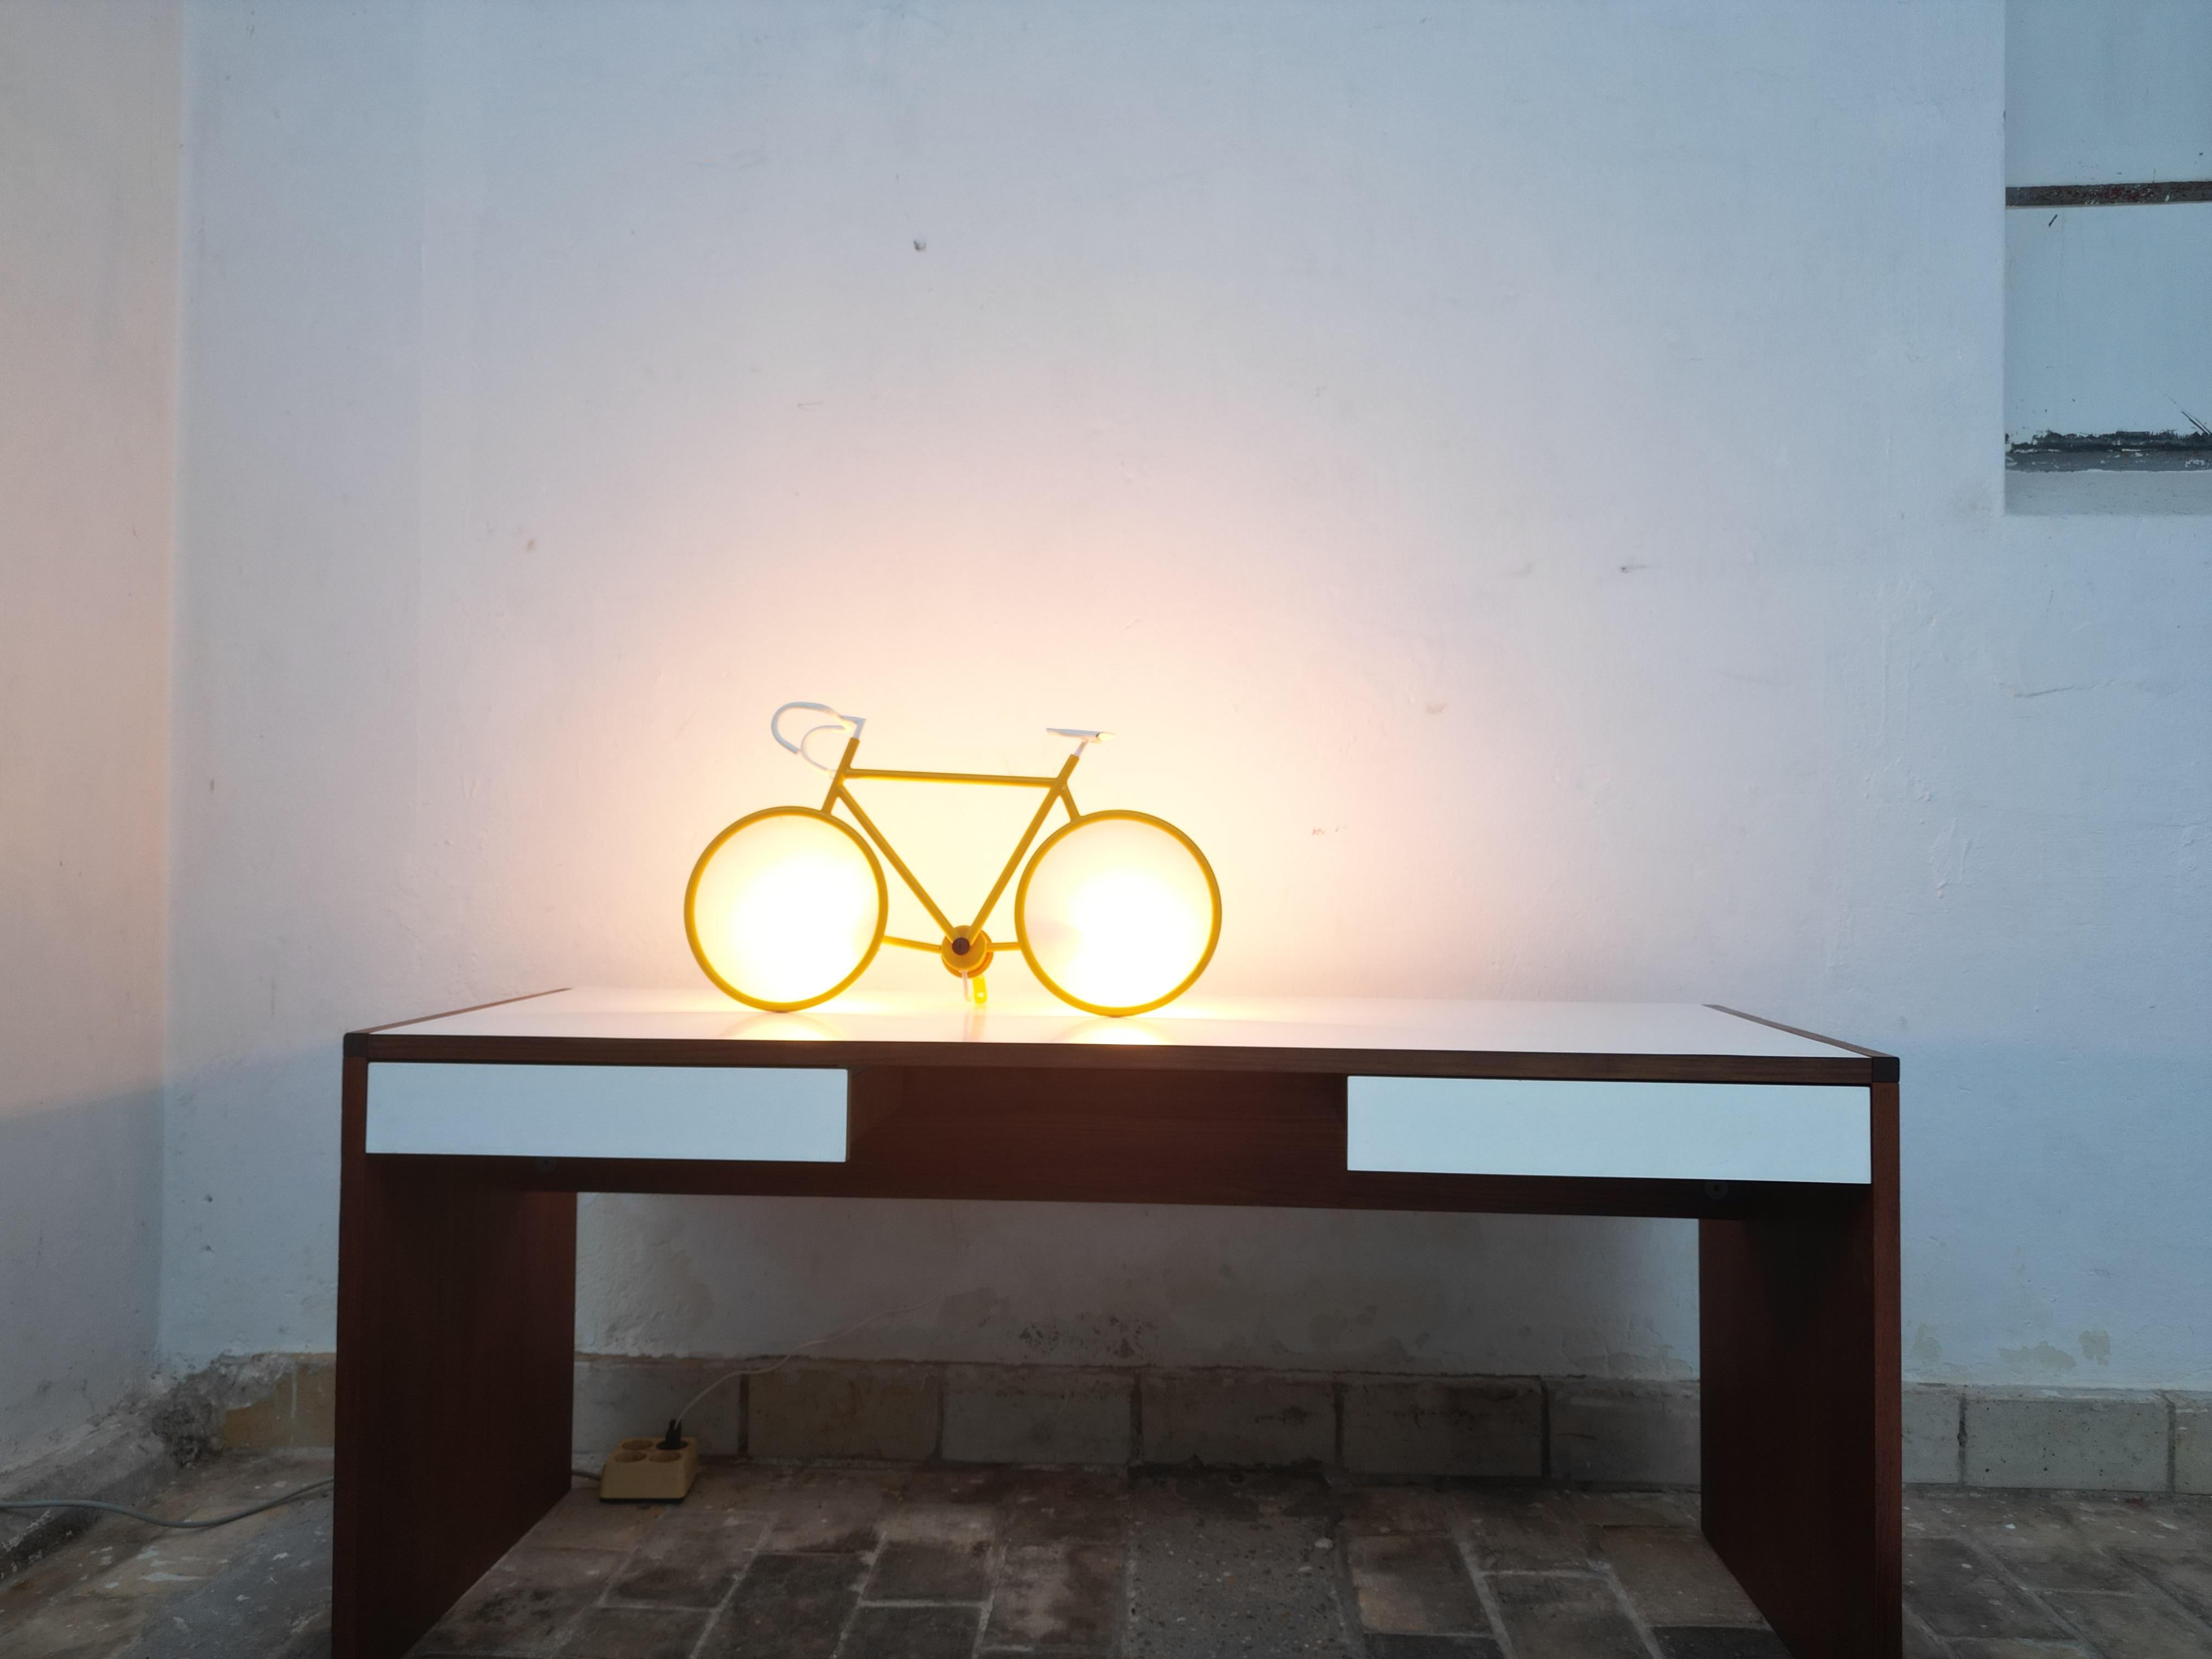 Italian Yellow Pop Art Racing Bicycle Wall or Table Lamp by Zicoli, Italy, 1970's For Sale